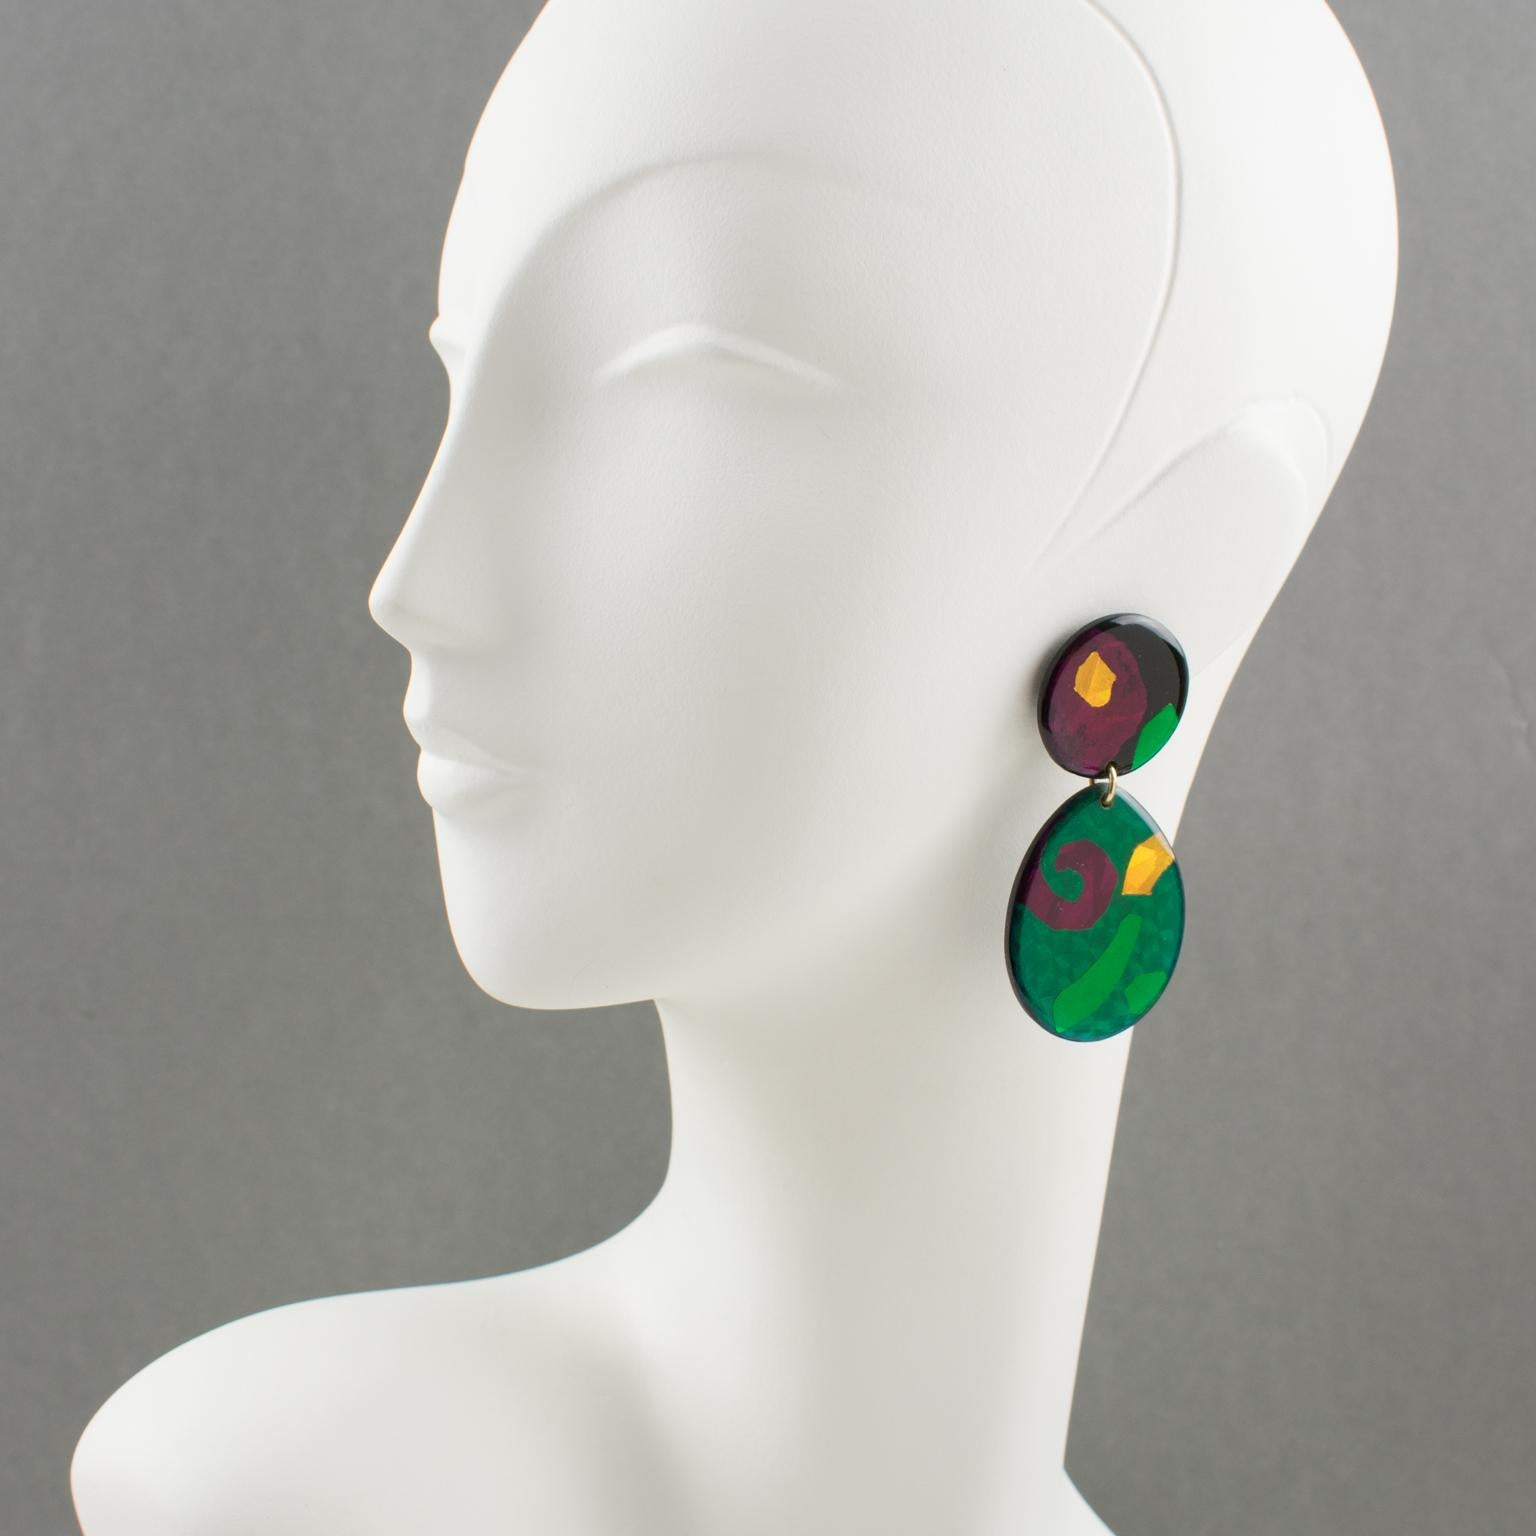 Lovely Lucite dangling clip-on earrings. Geometric design with round and drop shape in emerald green, hot pink, and yellow-orange colors with mirror effect and textured pattern. Total eye-catching Pop Art statement piece. No visible maker's